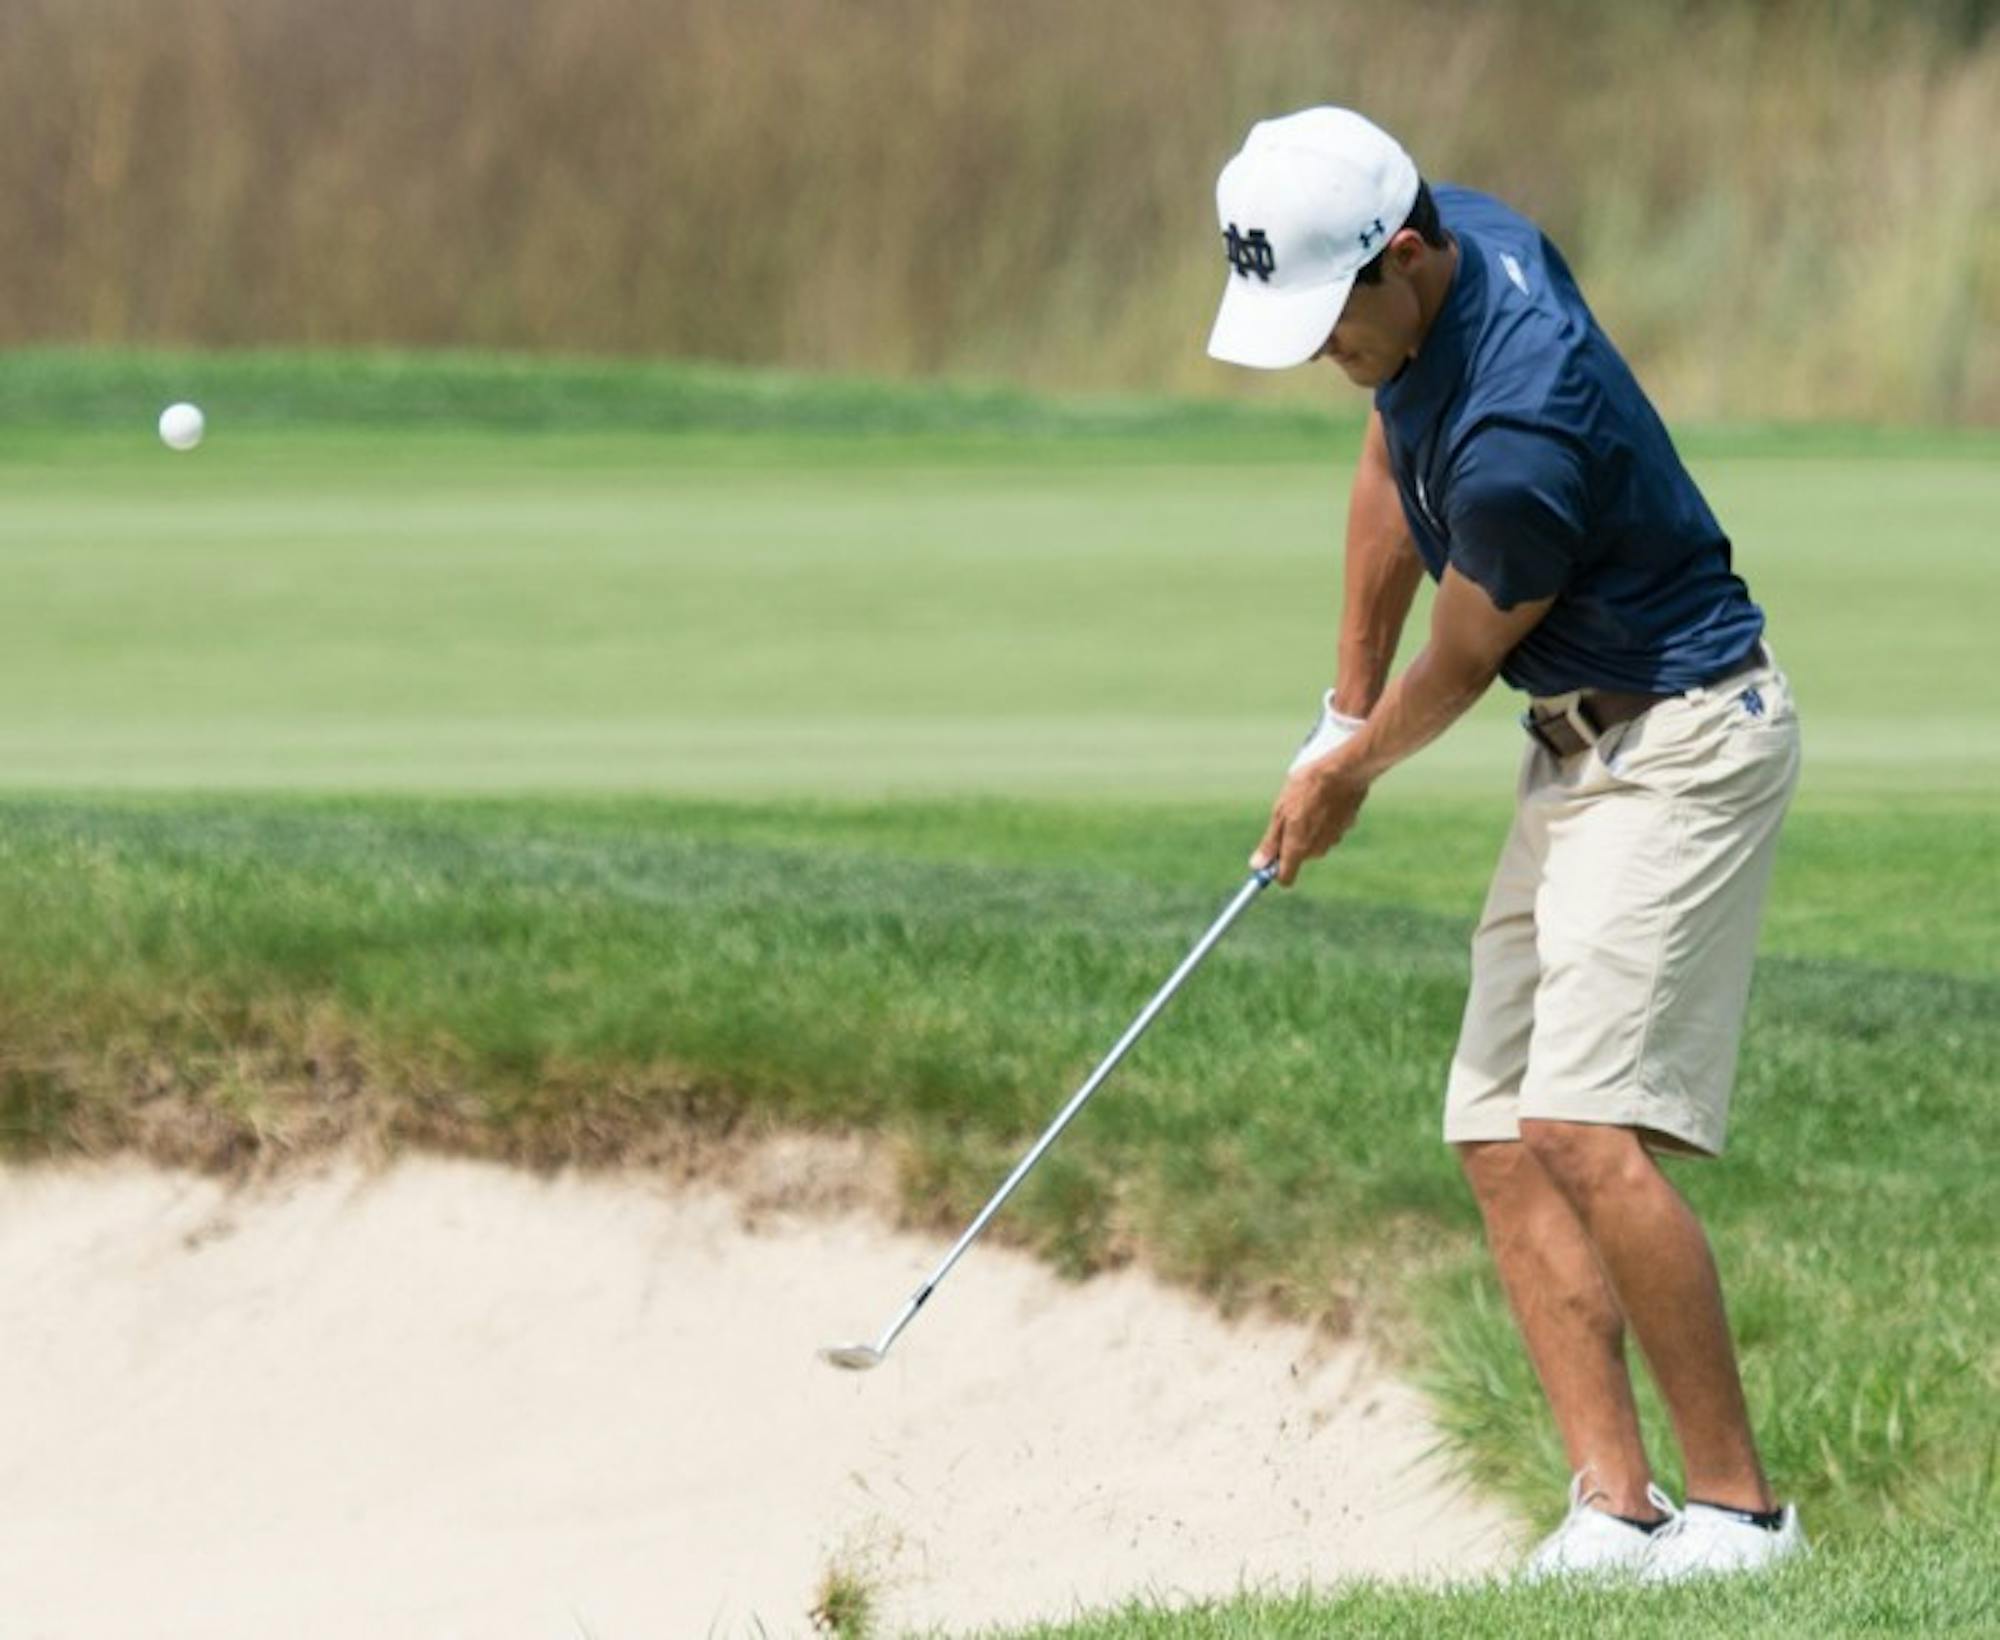 Irish senior Zach Toste follows through on a shot during the Notre Dame Kickoff Challenge on Aug. 31, 2014 at Warren Golf Course. Toste finised the day 17th overall while his Irish team won the event.